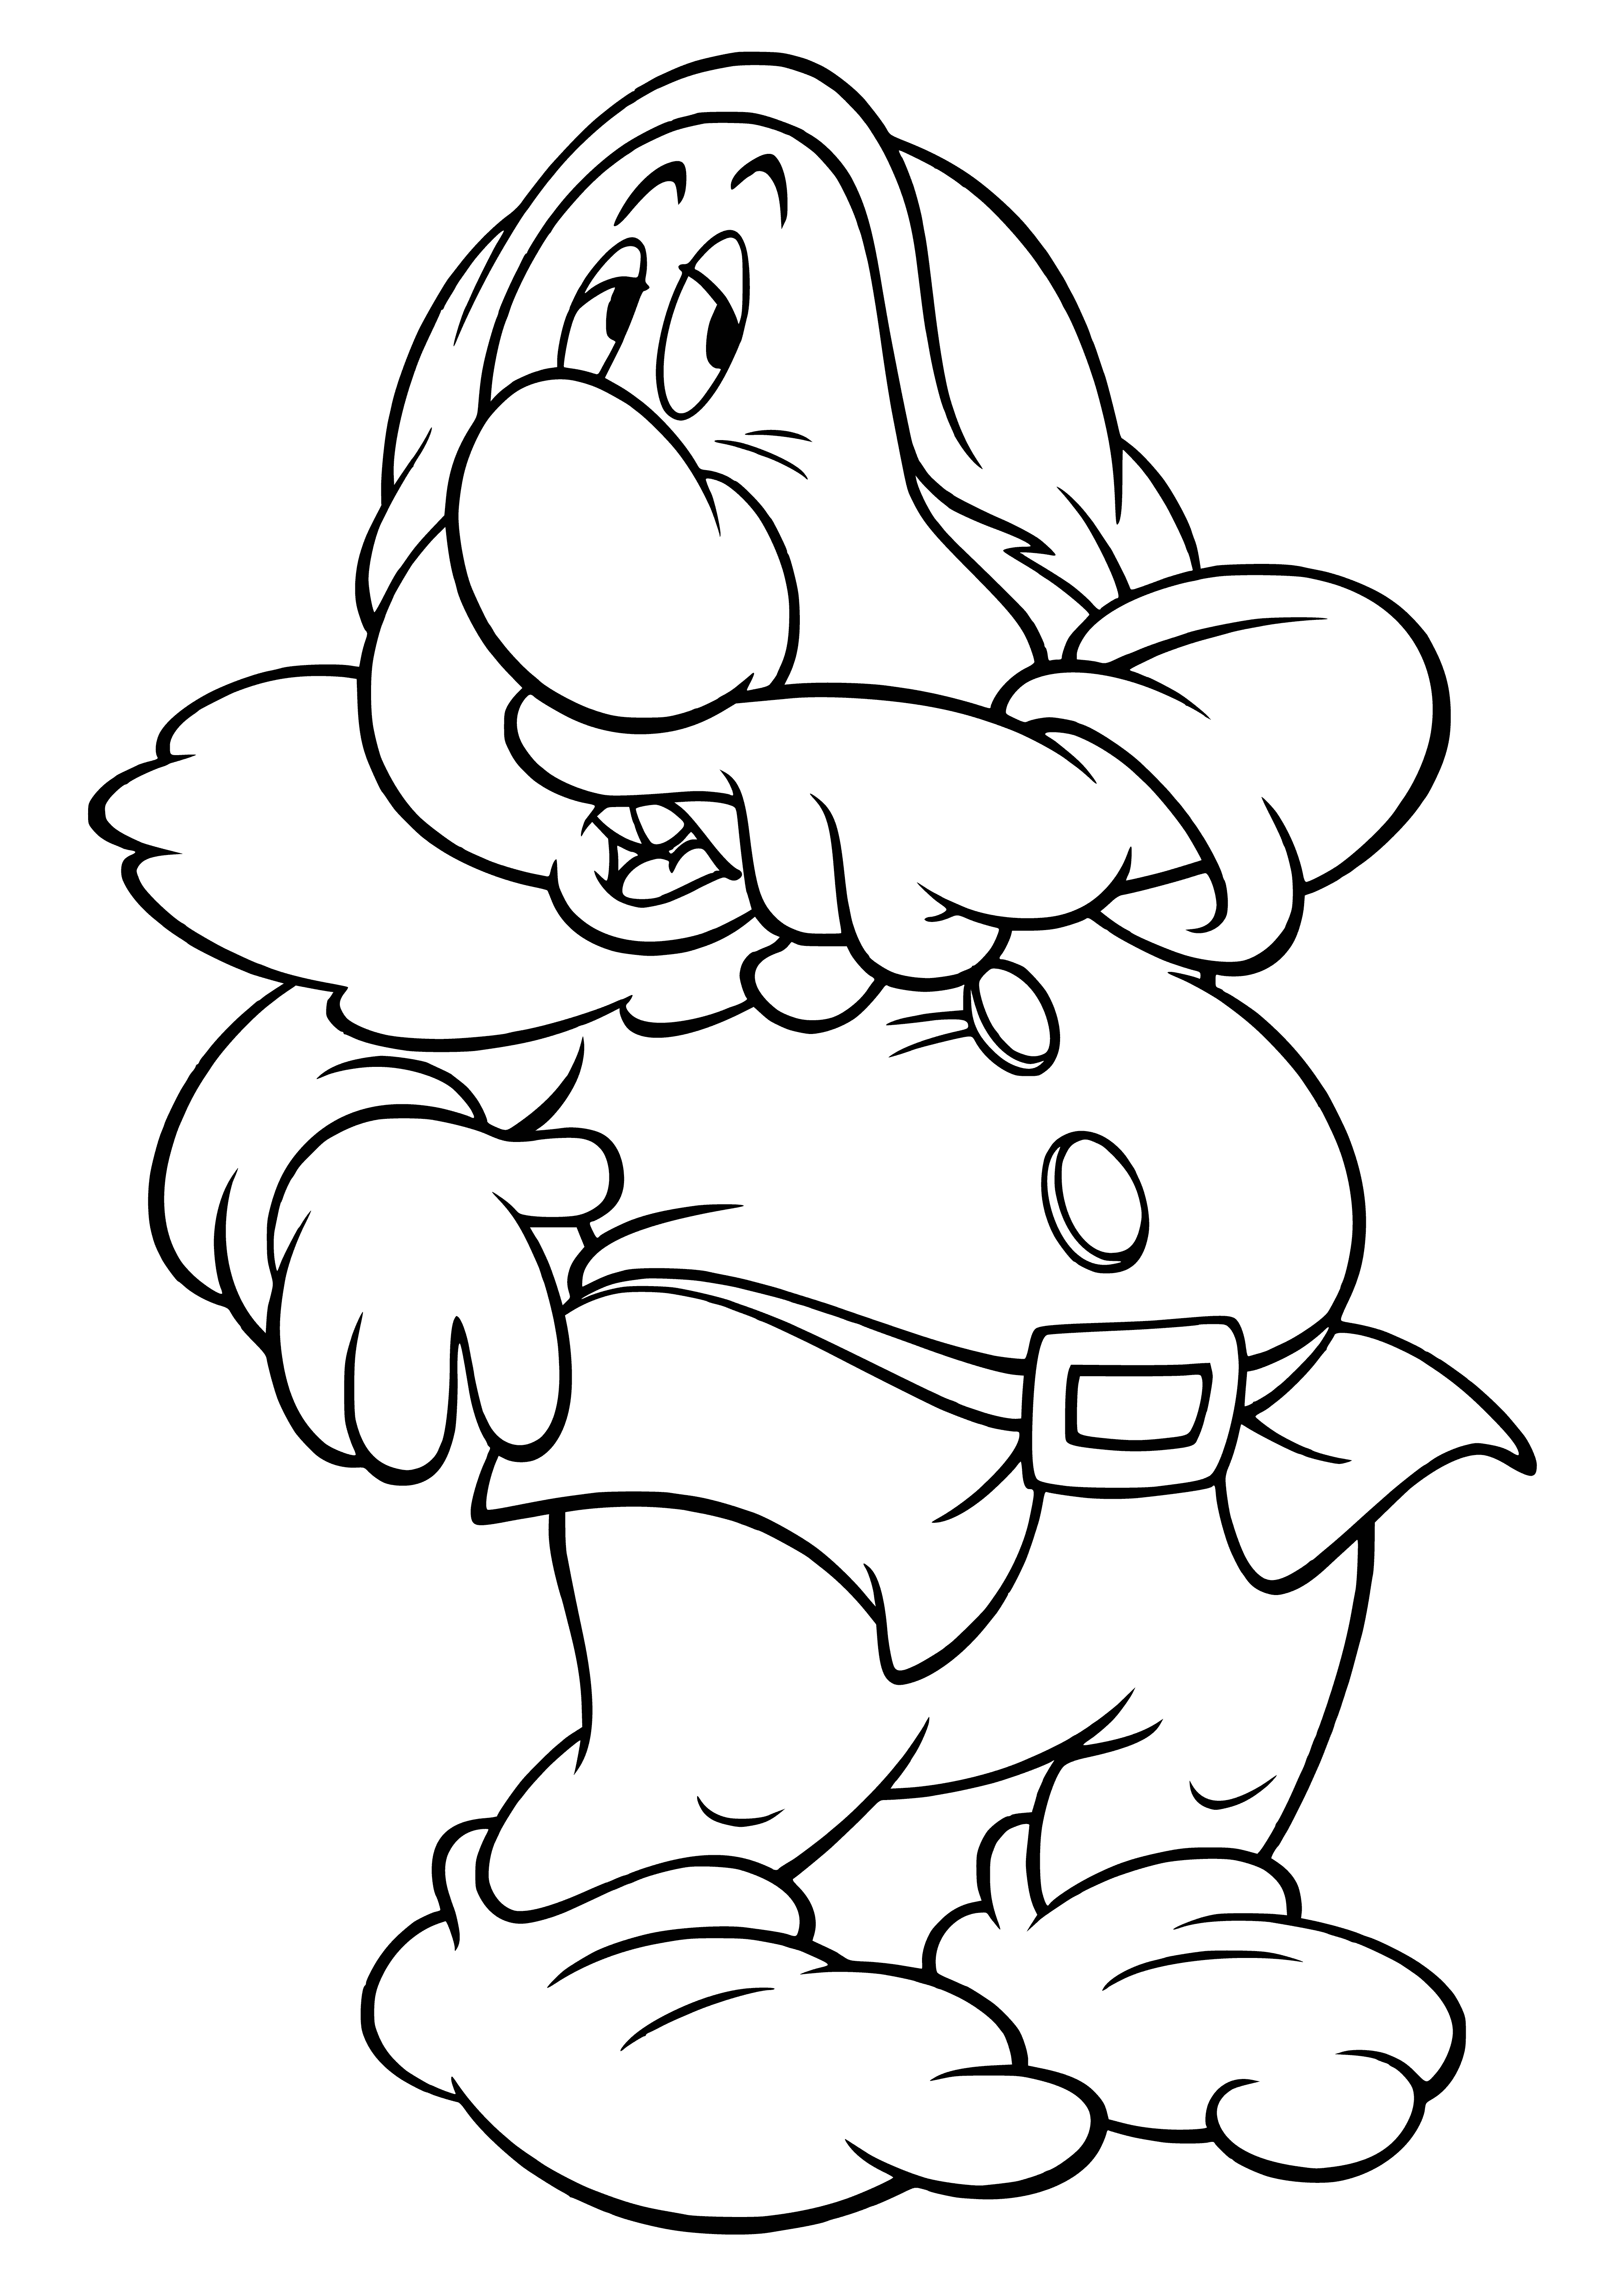 coloring page: A rotund creature with an oversized head and pointy ears, wearing a cummerbund, top hat, with a staff and sack.